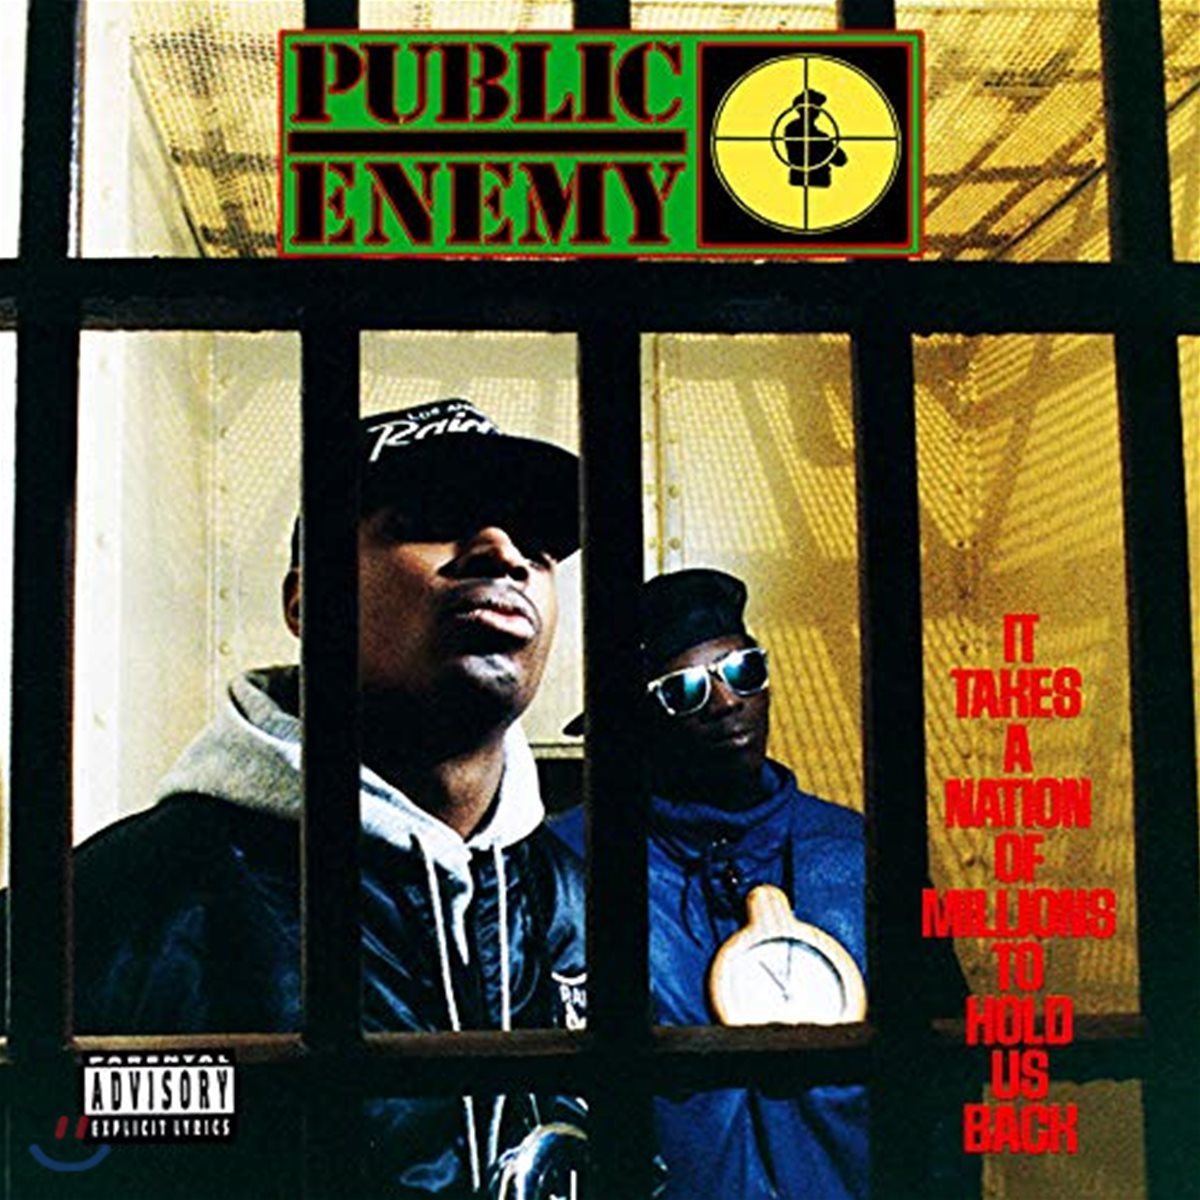 Public Enemy (퍼블릭 에너미) - It Takes A Nation Of Millions To Hold Us Back 정규 2집 (Explicit)